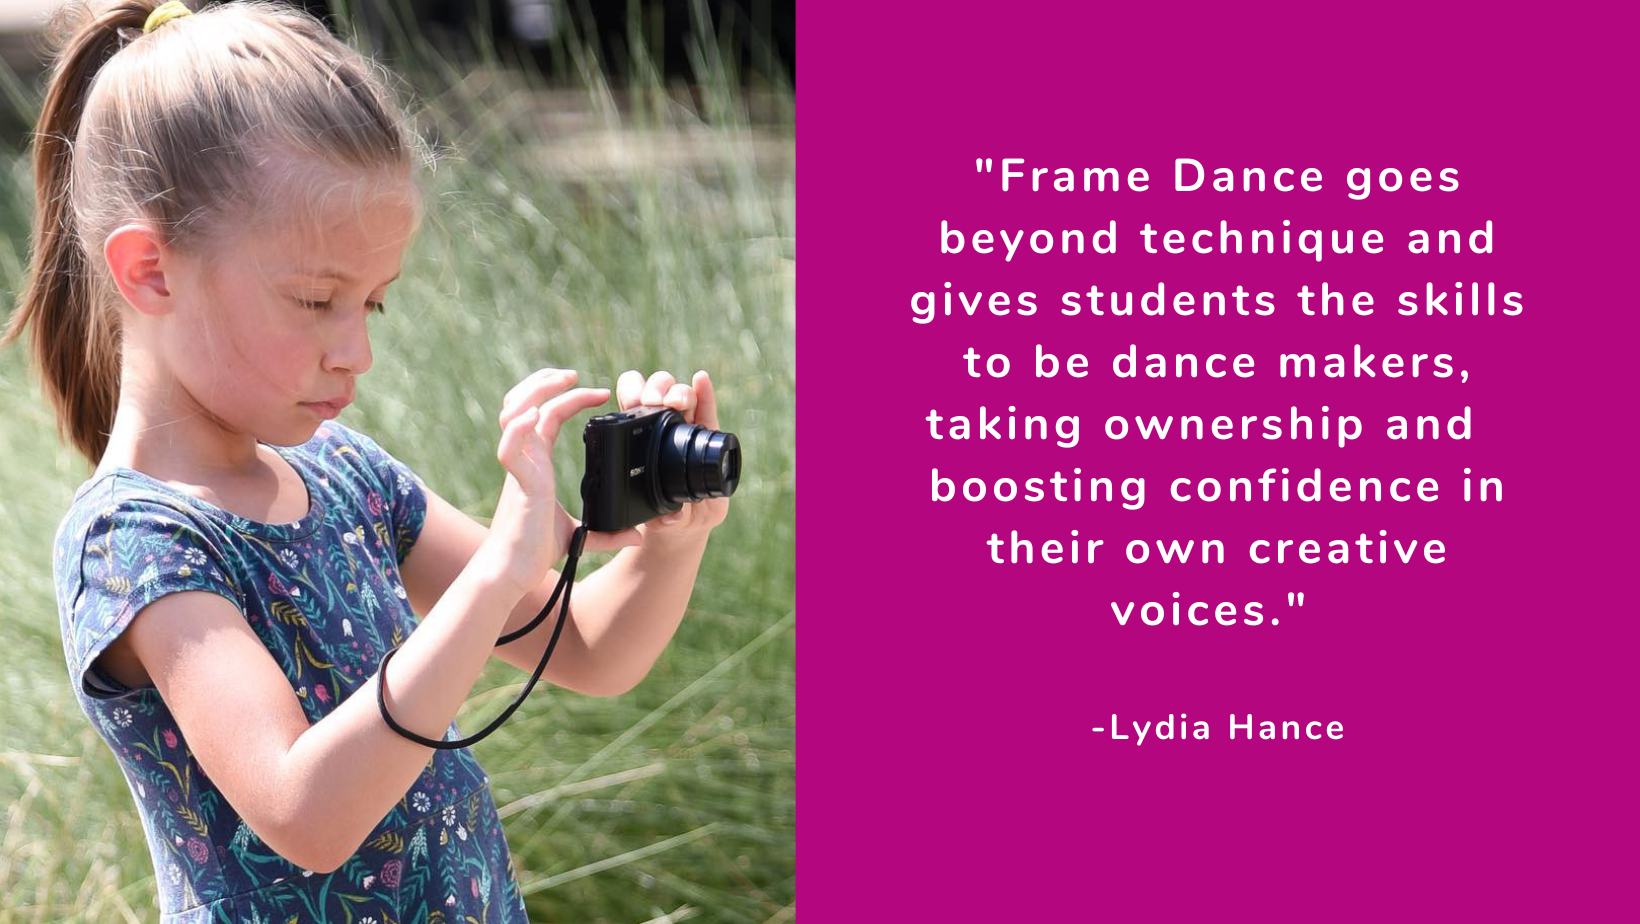 "Frame Dance goes beyond technique and gives students the skills to be dance makers, taking ownership and boosting confidence in their own creative voices." -Lydia Hance